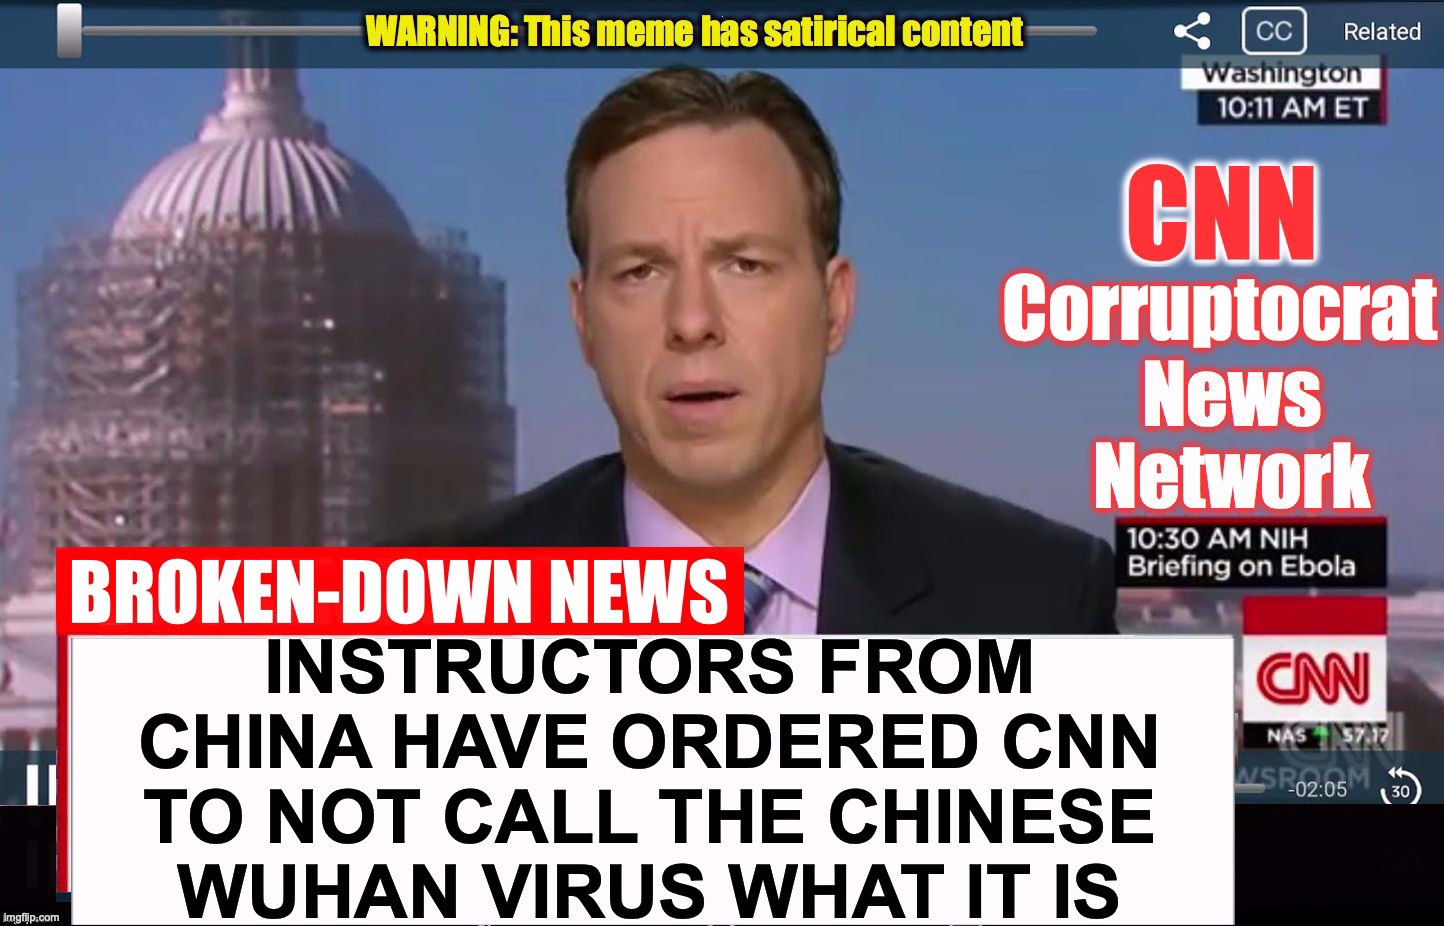 Because, when it's life or death, it's important to coverup the source | INSTRUCTORS FROM CHINA HAVE ORDERED CNN TO NOT CALL THE CHINESE WUHAN VIRUS WHAT IT IS | image tagged in cnn corruptocrat news network | made w/ Imgflip meme maker